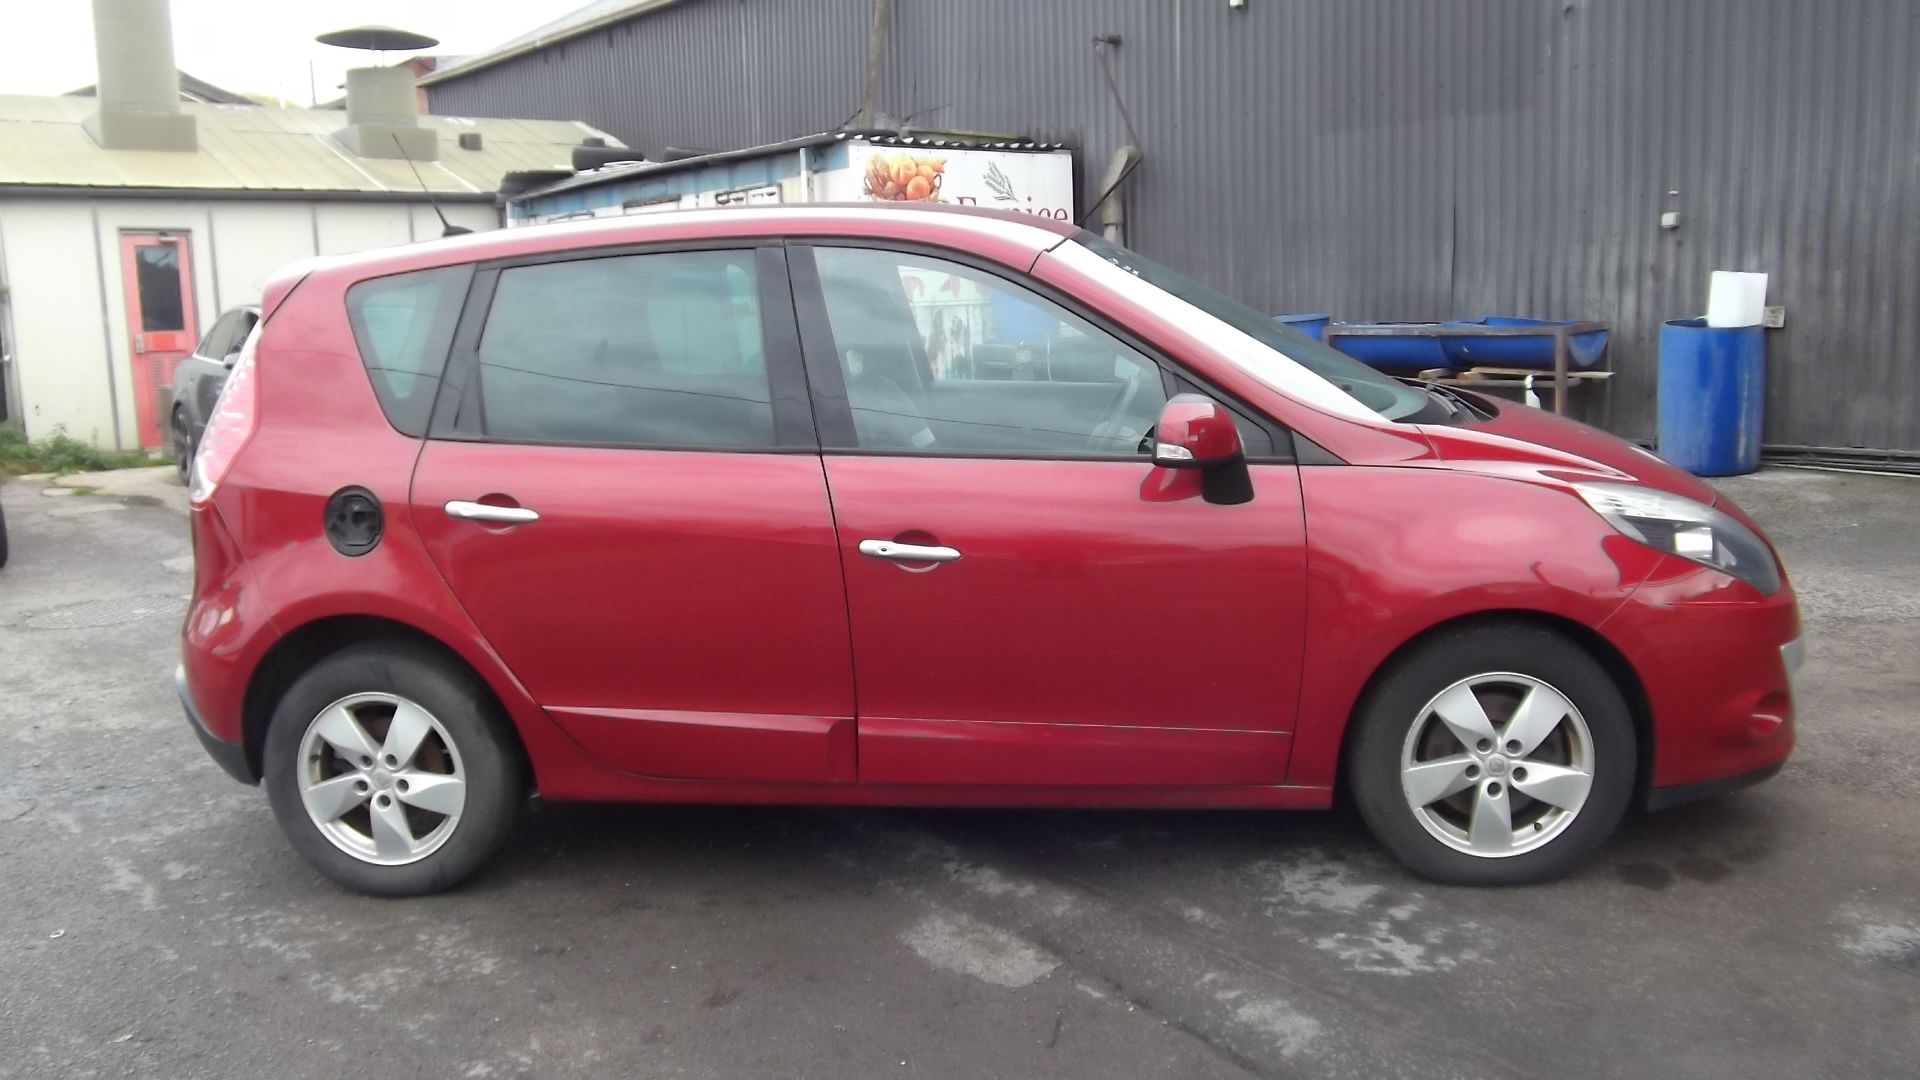 2011 Renault Scenic 1.5 DCI Dynamique Tom Tom 5 Door MPV - Image 3 of 17